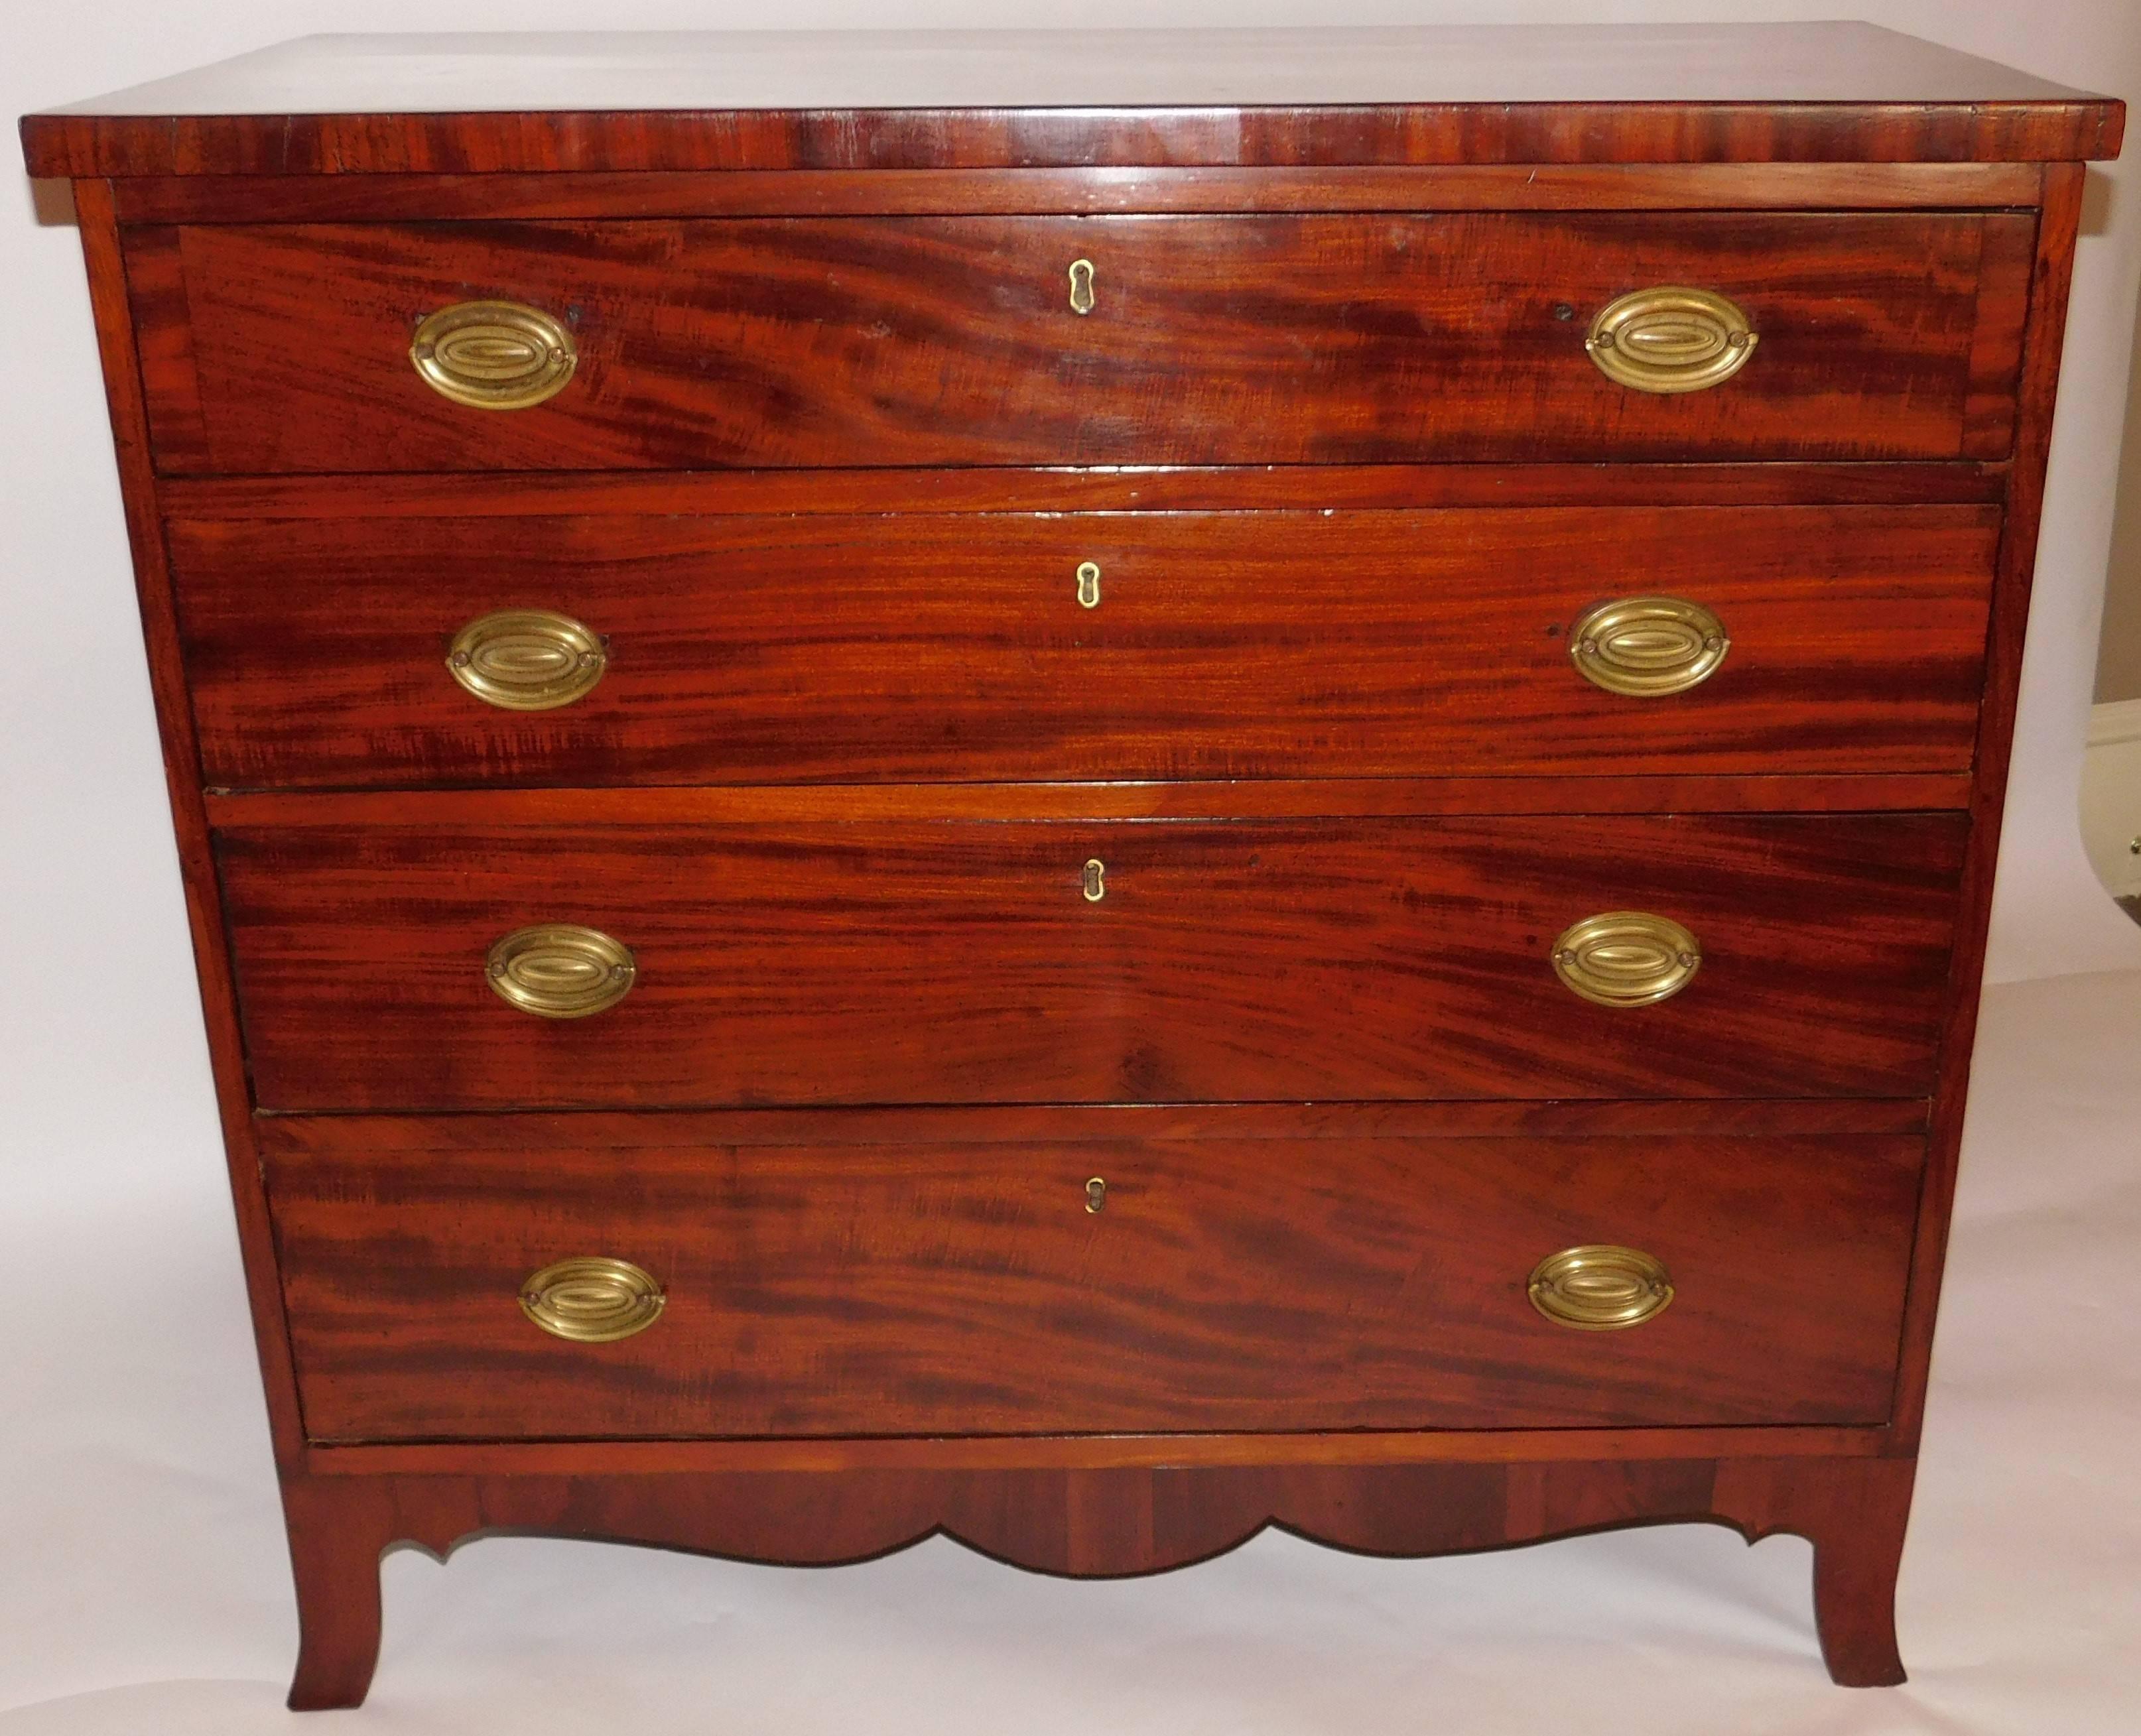 This Mid-Atlantic Federal piece was probably made in Virginia, mahogany and mahogany veneer with pine secondary wood, French polish, replaced solid brass hardware and banded end top drawer.